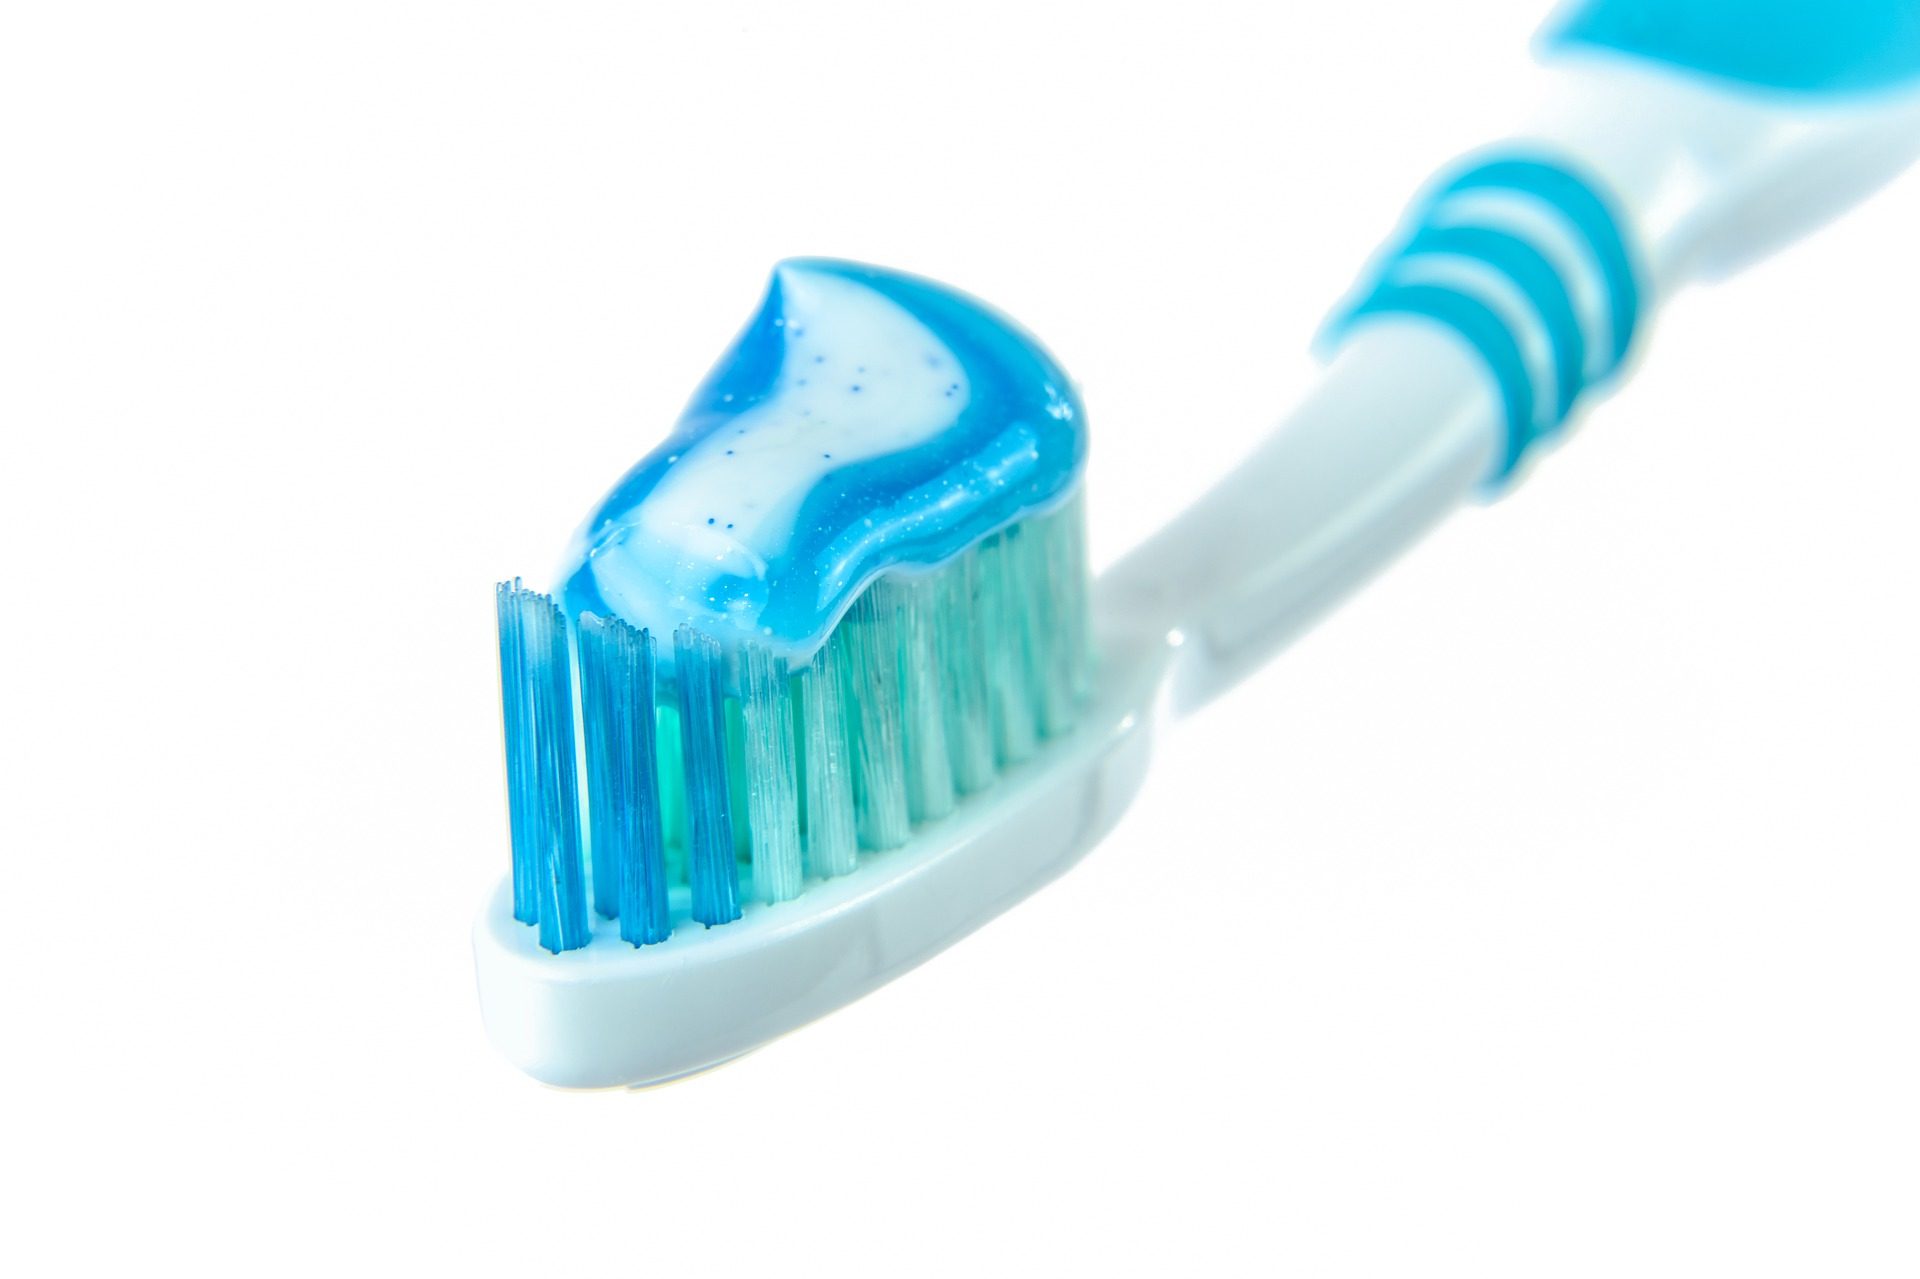 Toothbrushing best practices - Gingivitis Home Remedies | Southview Dentistry in Charlotte NC